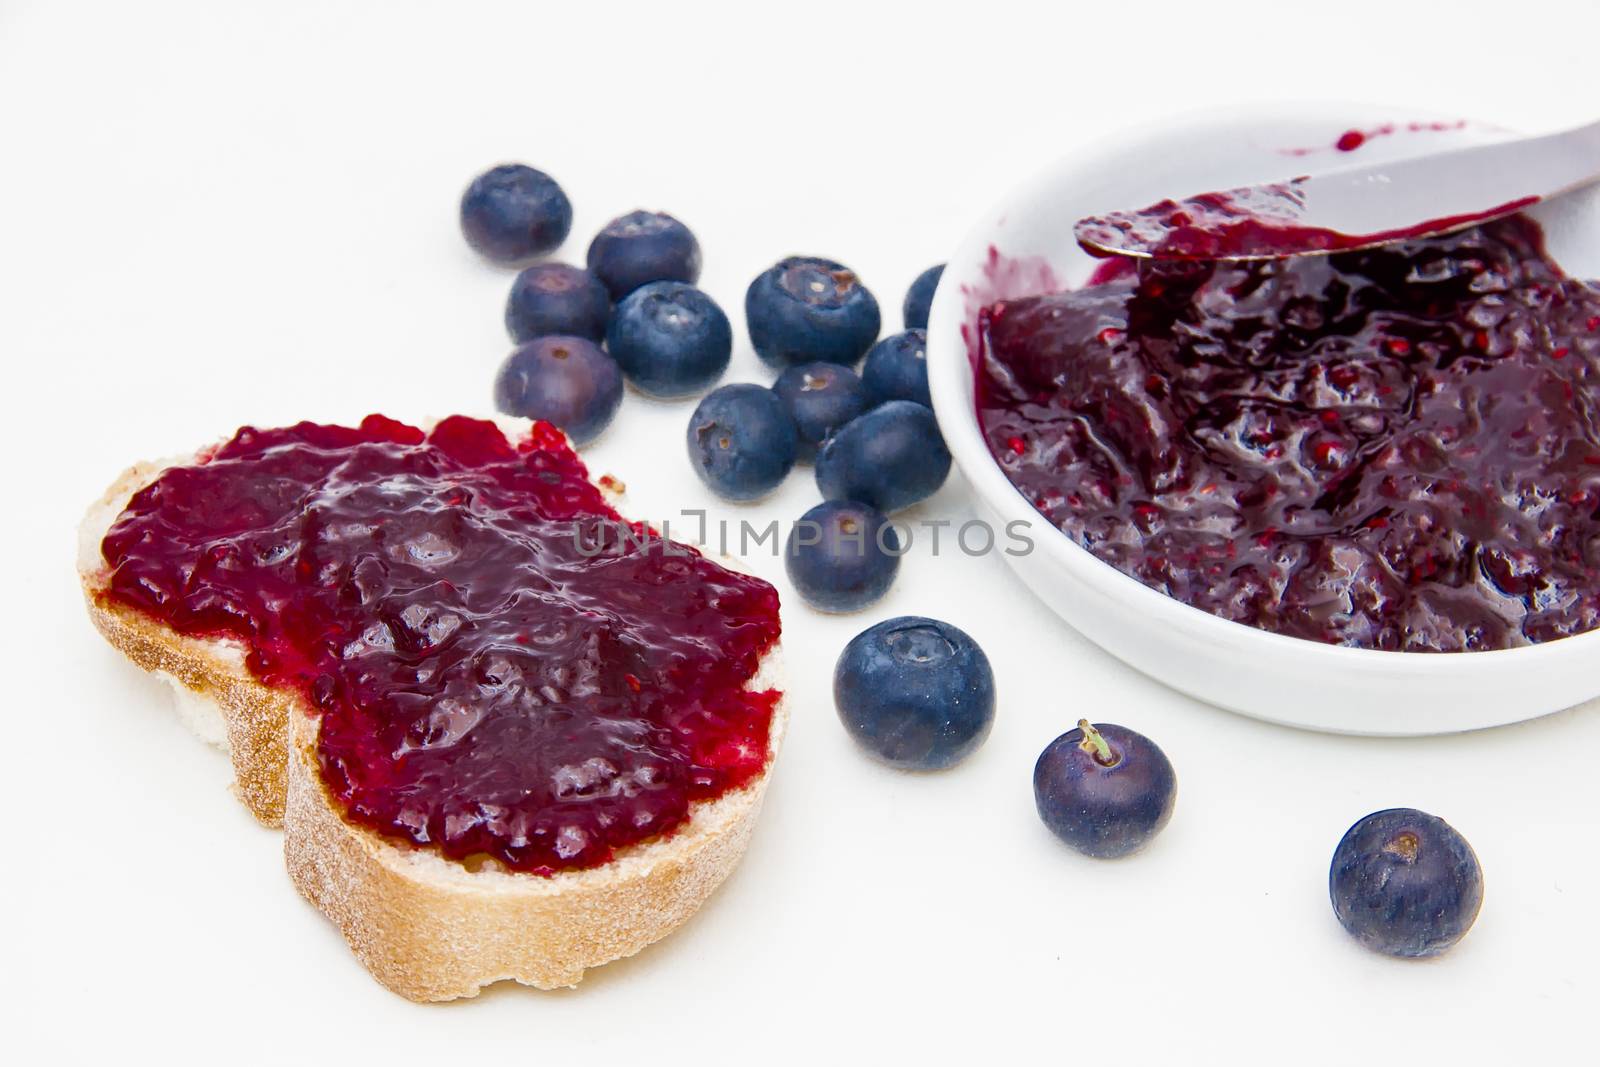 Blueberry jam by spafra